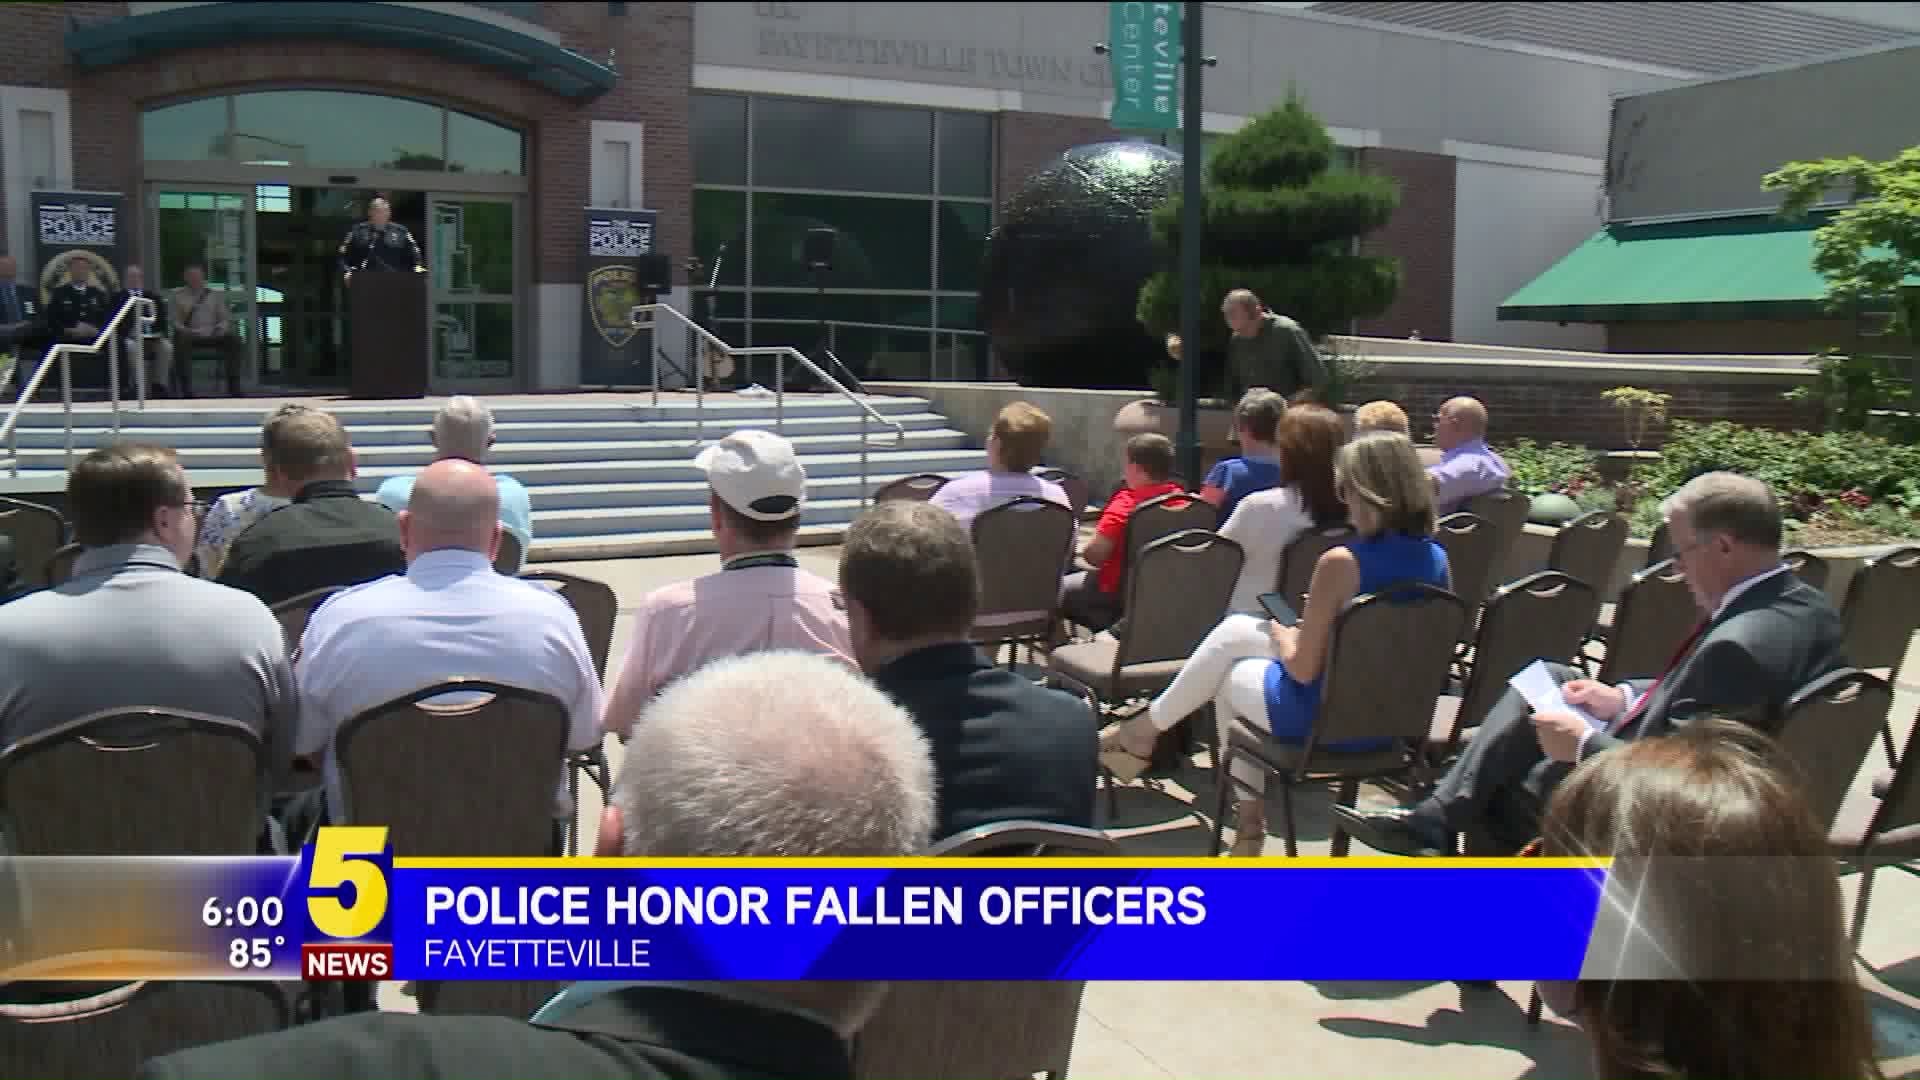 Police Honor Fallen Officers